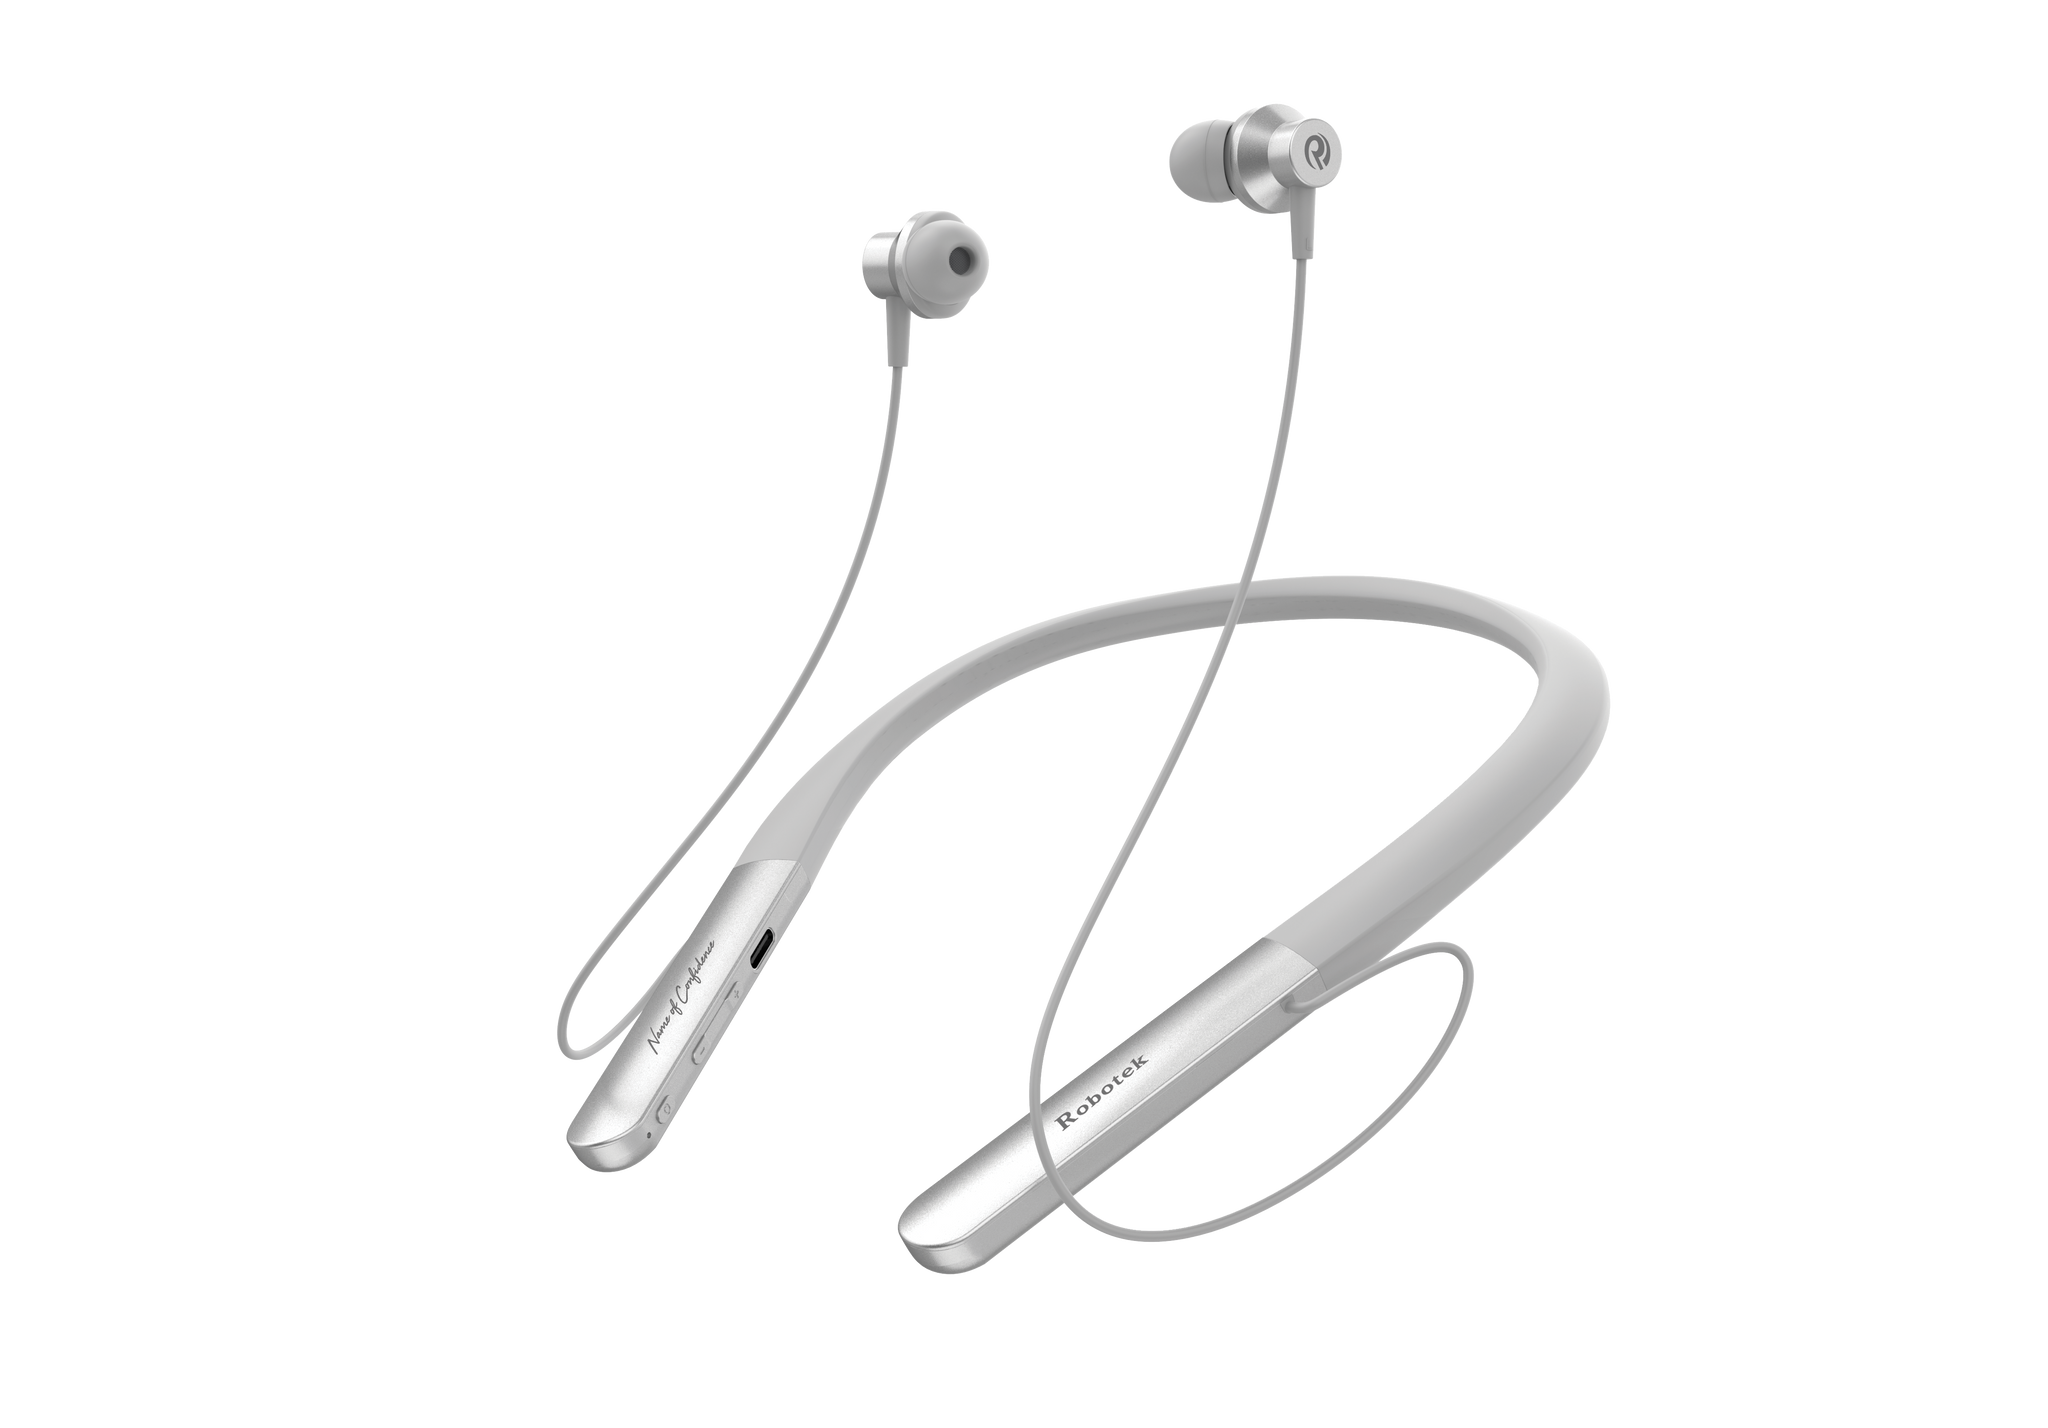 YOG Wireless Bluetooth in Ear Headphones, 13mm Driver, Upto 27Hr Playback Deep Bass, Type-C Fast Charging (10Mins=7.5Hrs Playtime), HD Calls, Fast Charging Type-C Neckband, Magnetic Buds, IPX5 Water Resistant & Sweatproof